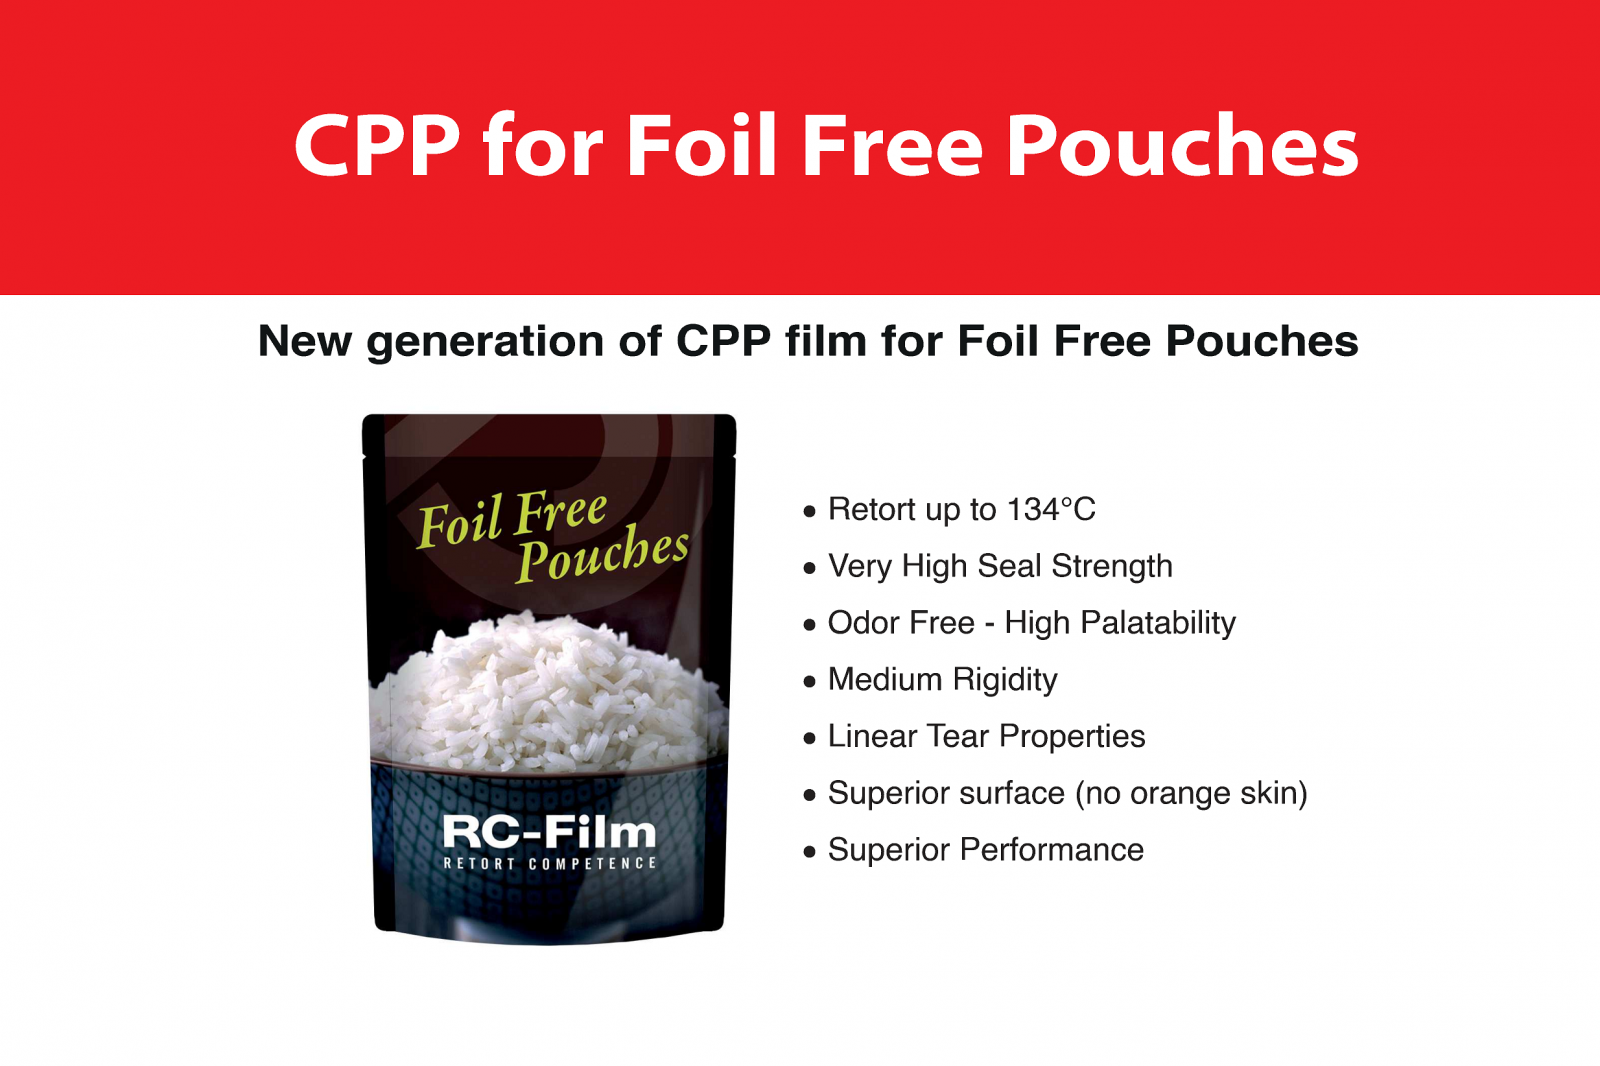 CPP_forFoil_Free Pouches_RCH-13-W